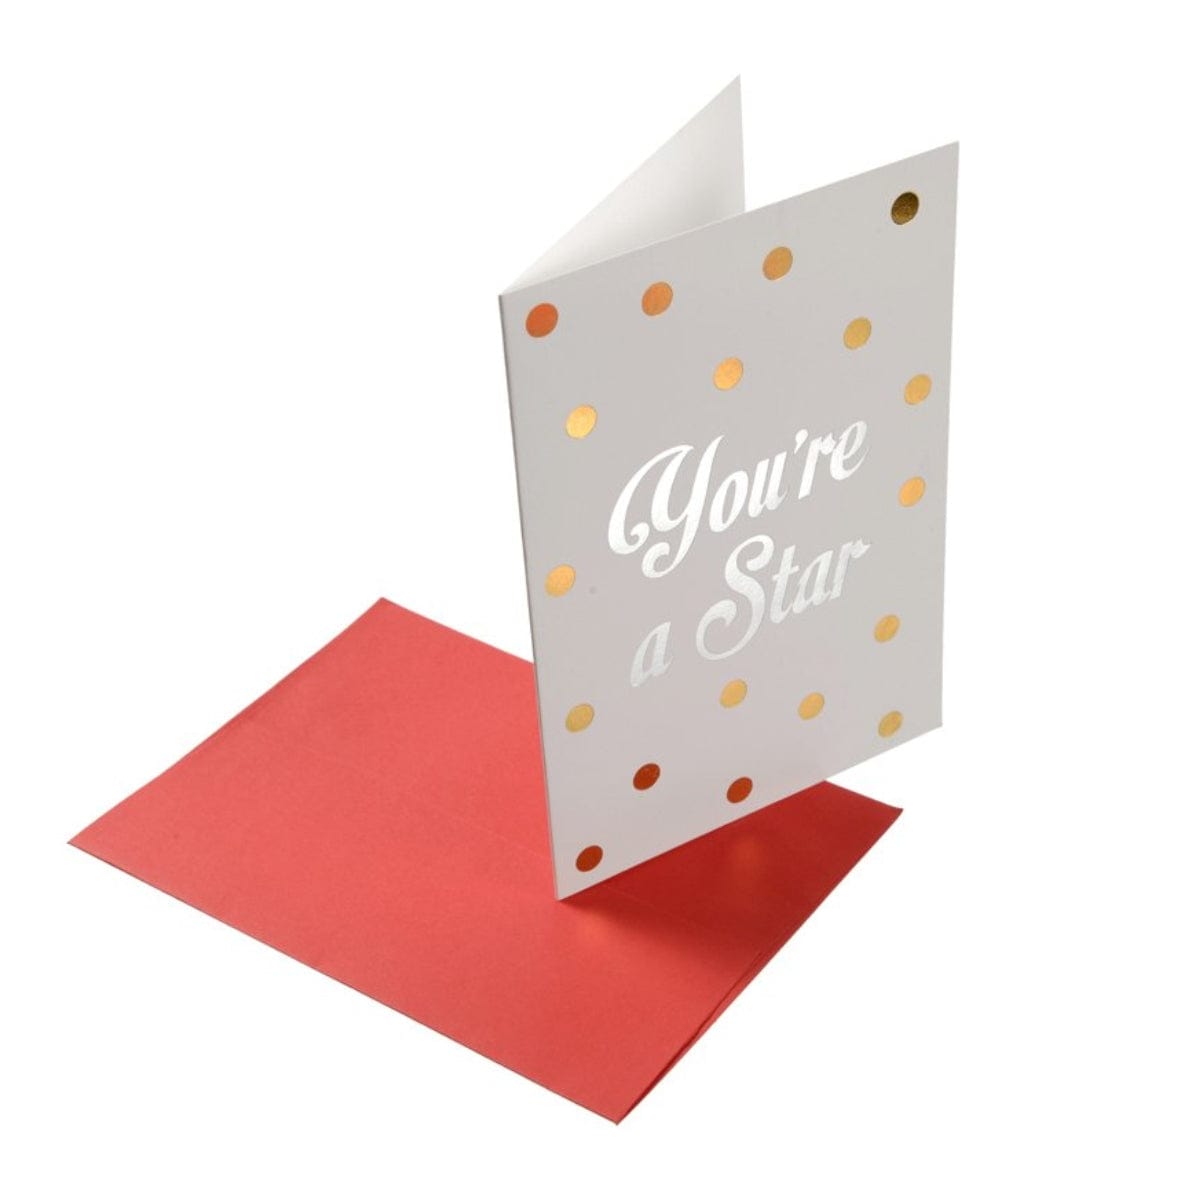 Gifts of Love Dazzle Greeting Cards You're a Star